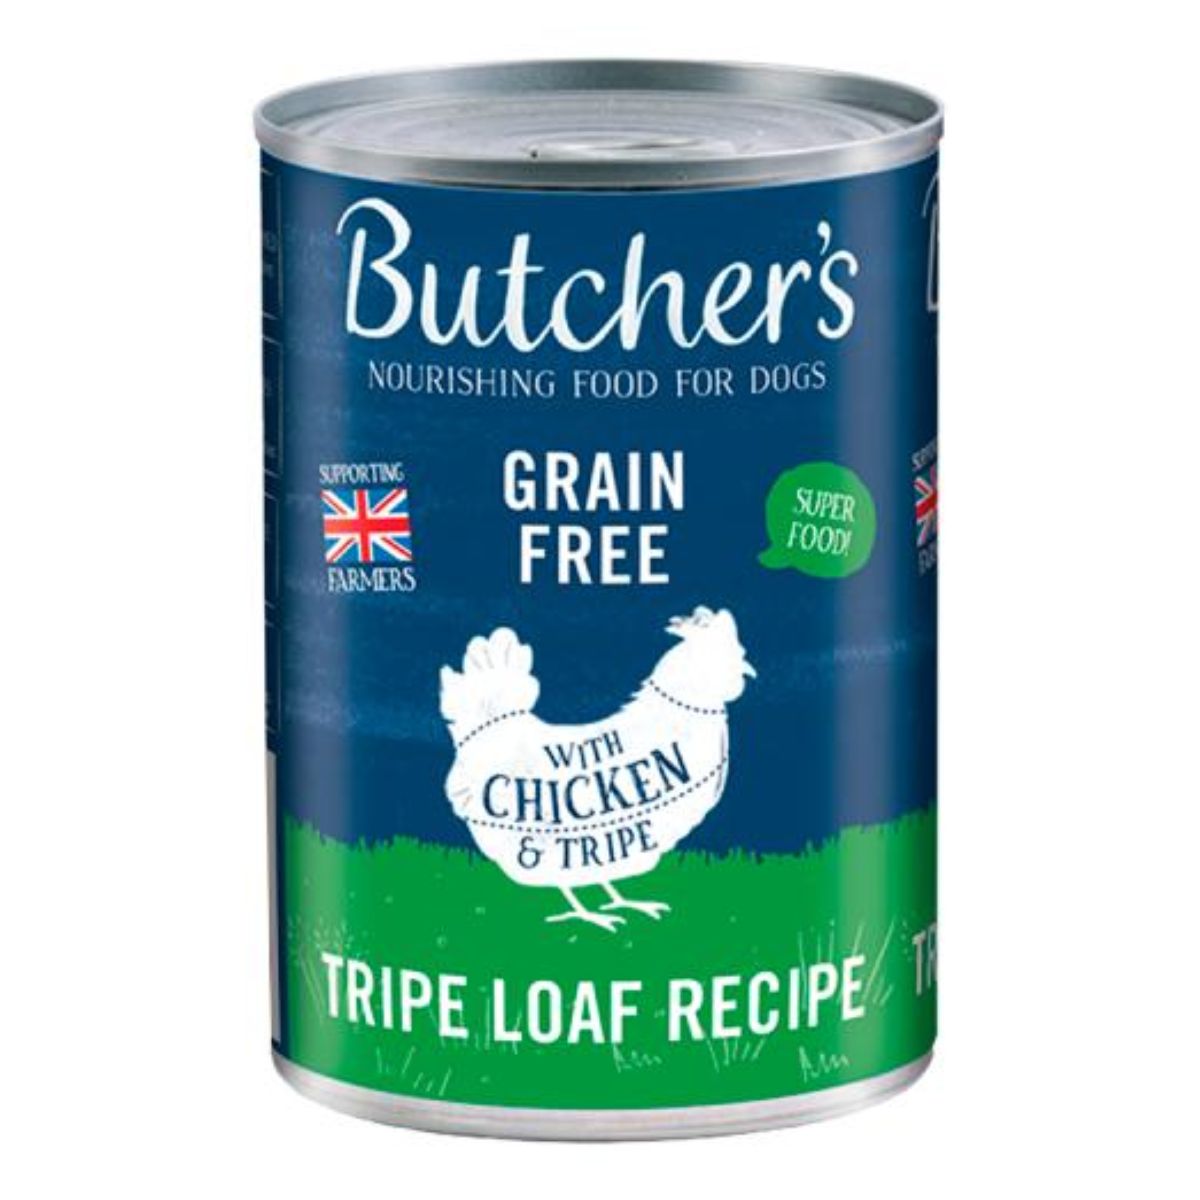 Butchers - Chicken & Tripe Wet Dog Food Tin - 400g can.